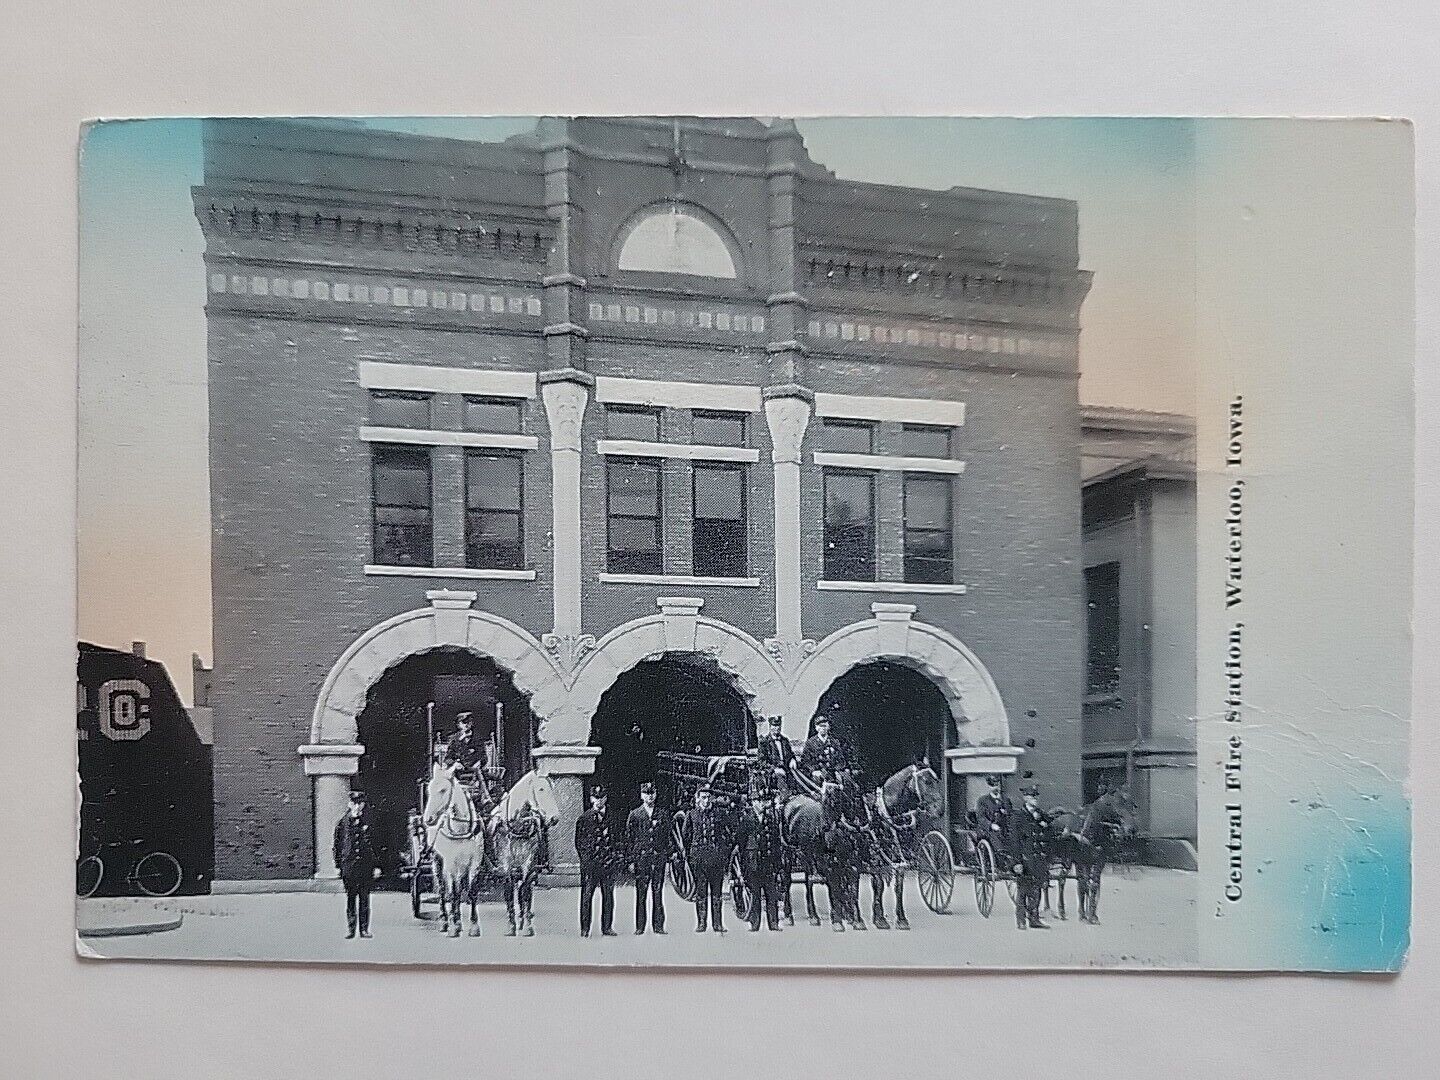 EARLY WATERLOO IOWA CENTRAL FIRE STATION FIREMEN HORSE DRAWN HOSE CARTS POSTCARD